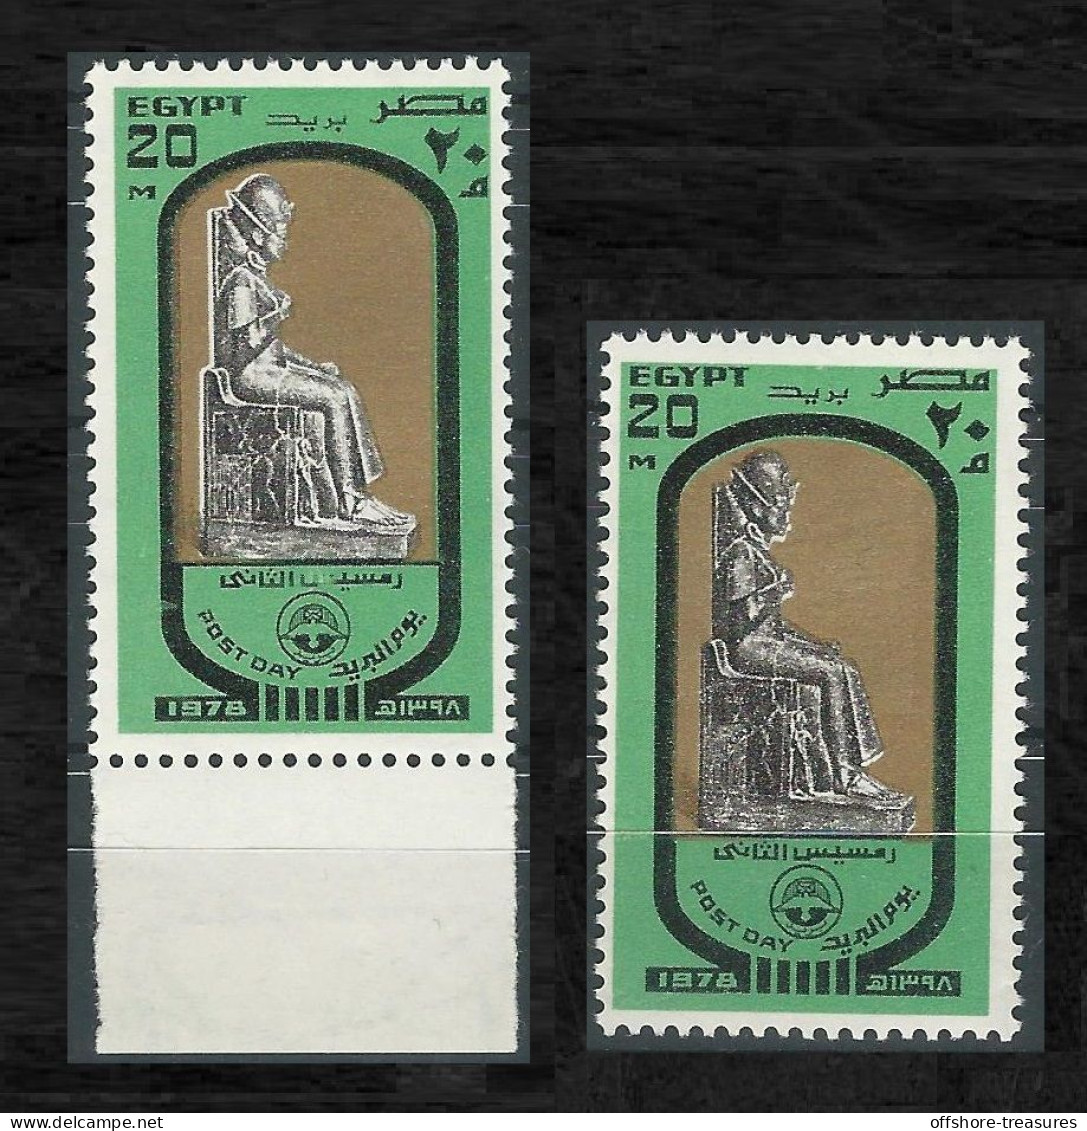 Egypt 1987 King Ramses Post Day 2 STAMP PRINT VARIETY / ERROR MNH STAMPS / SEE SCANS - Cartas & Documentos